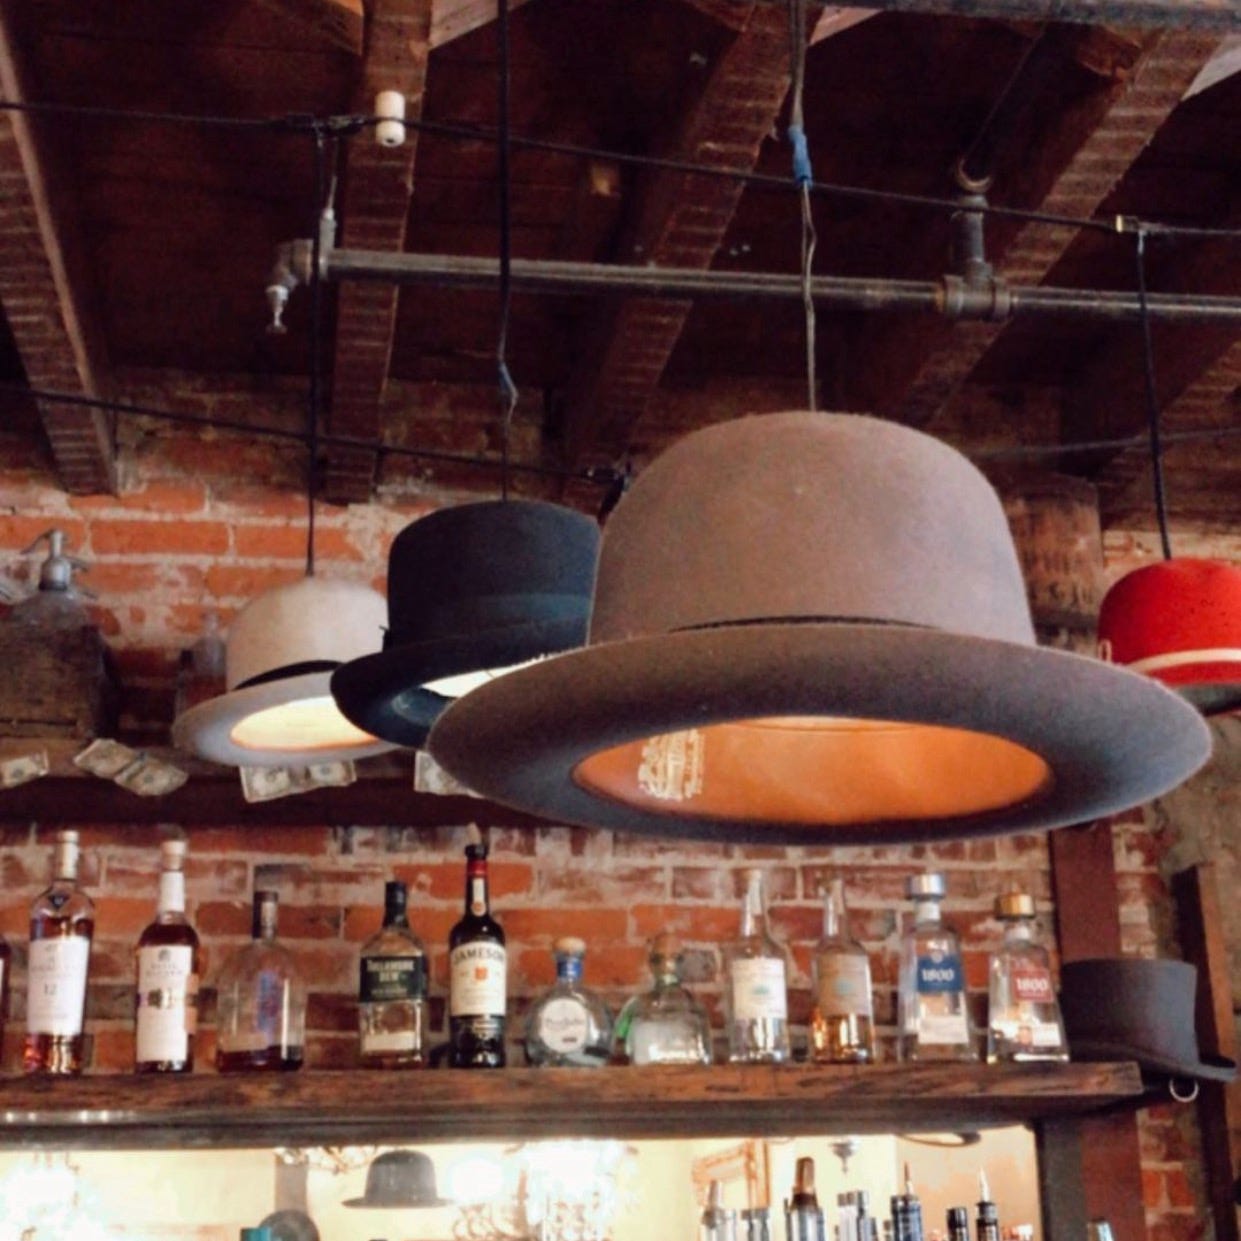 Three old bowler hats transformed into hanging lights, hang above a bar at a restaurant called the Hattery